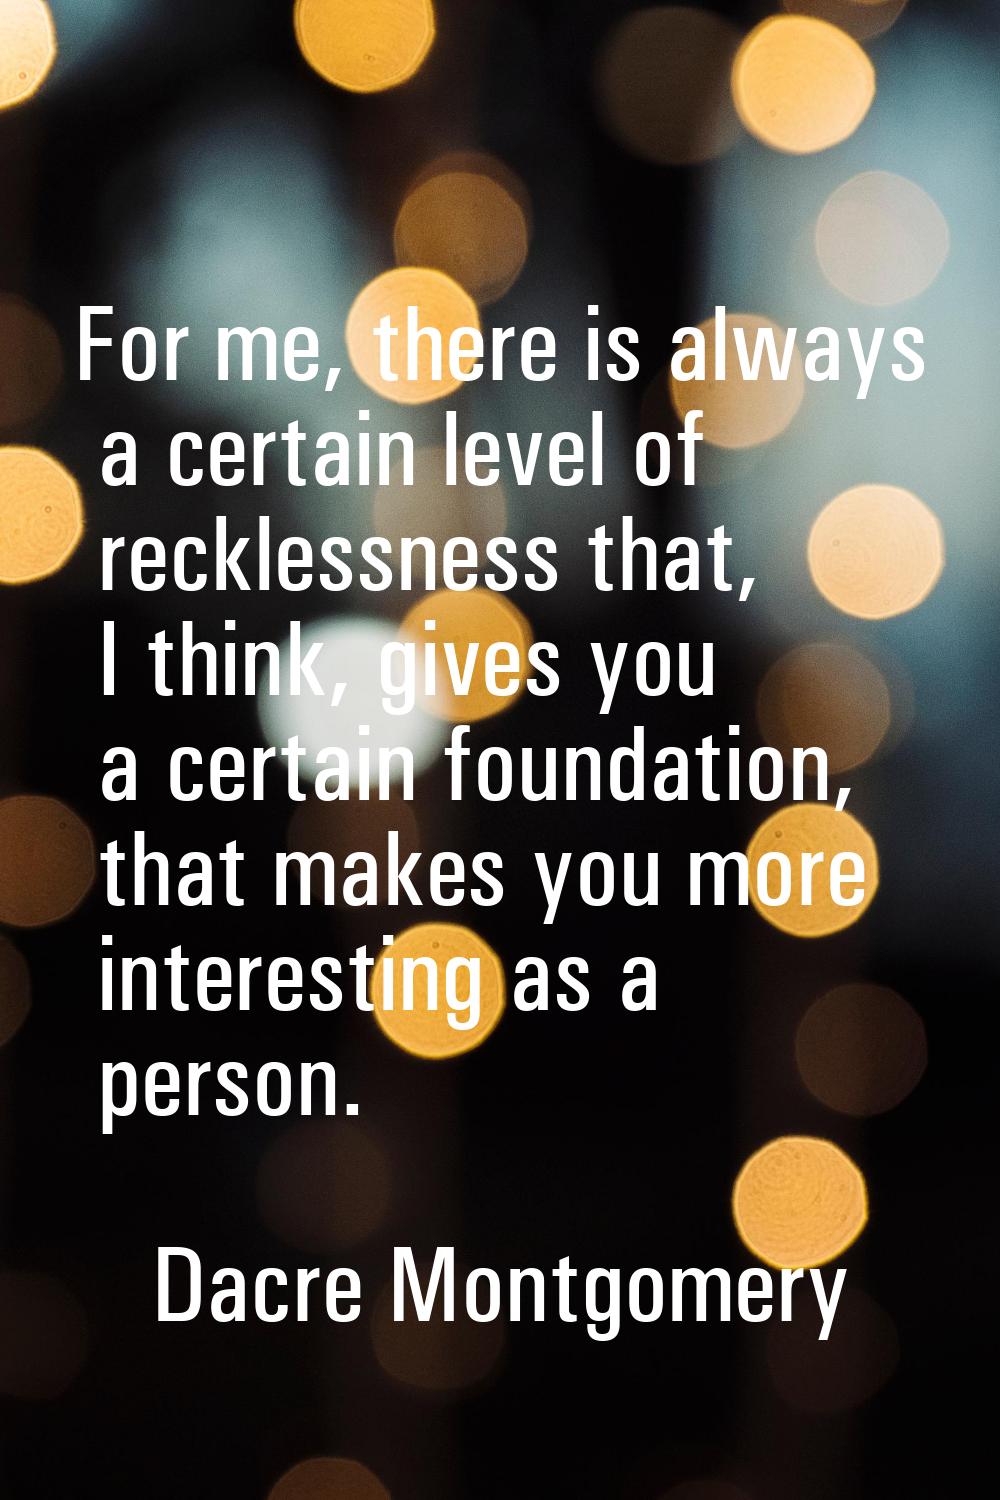 For me, there is always a certain level of recklessness that, I think, gives you a certain foundati